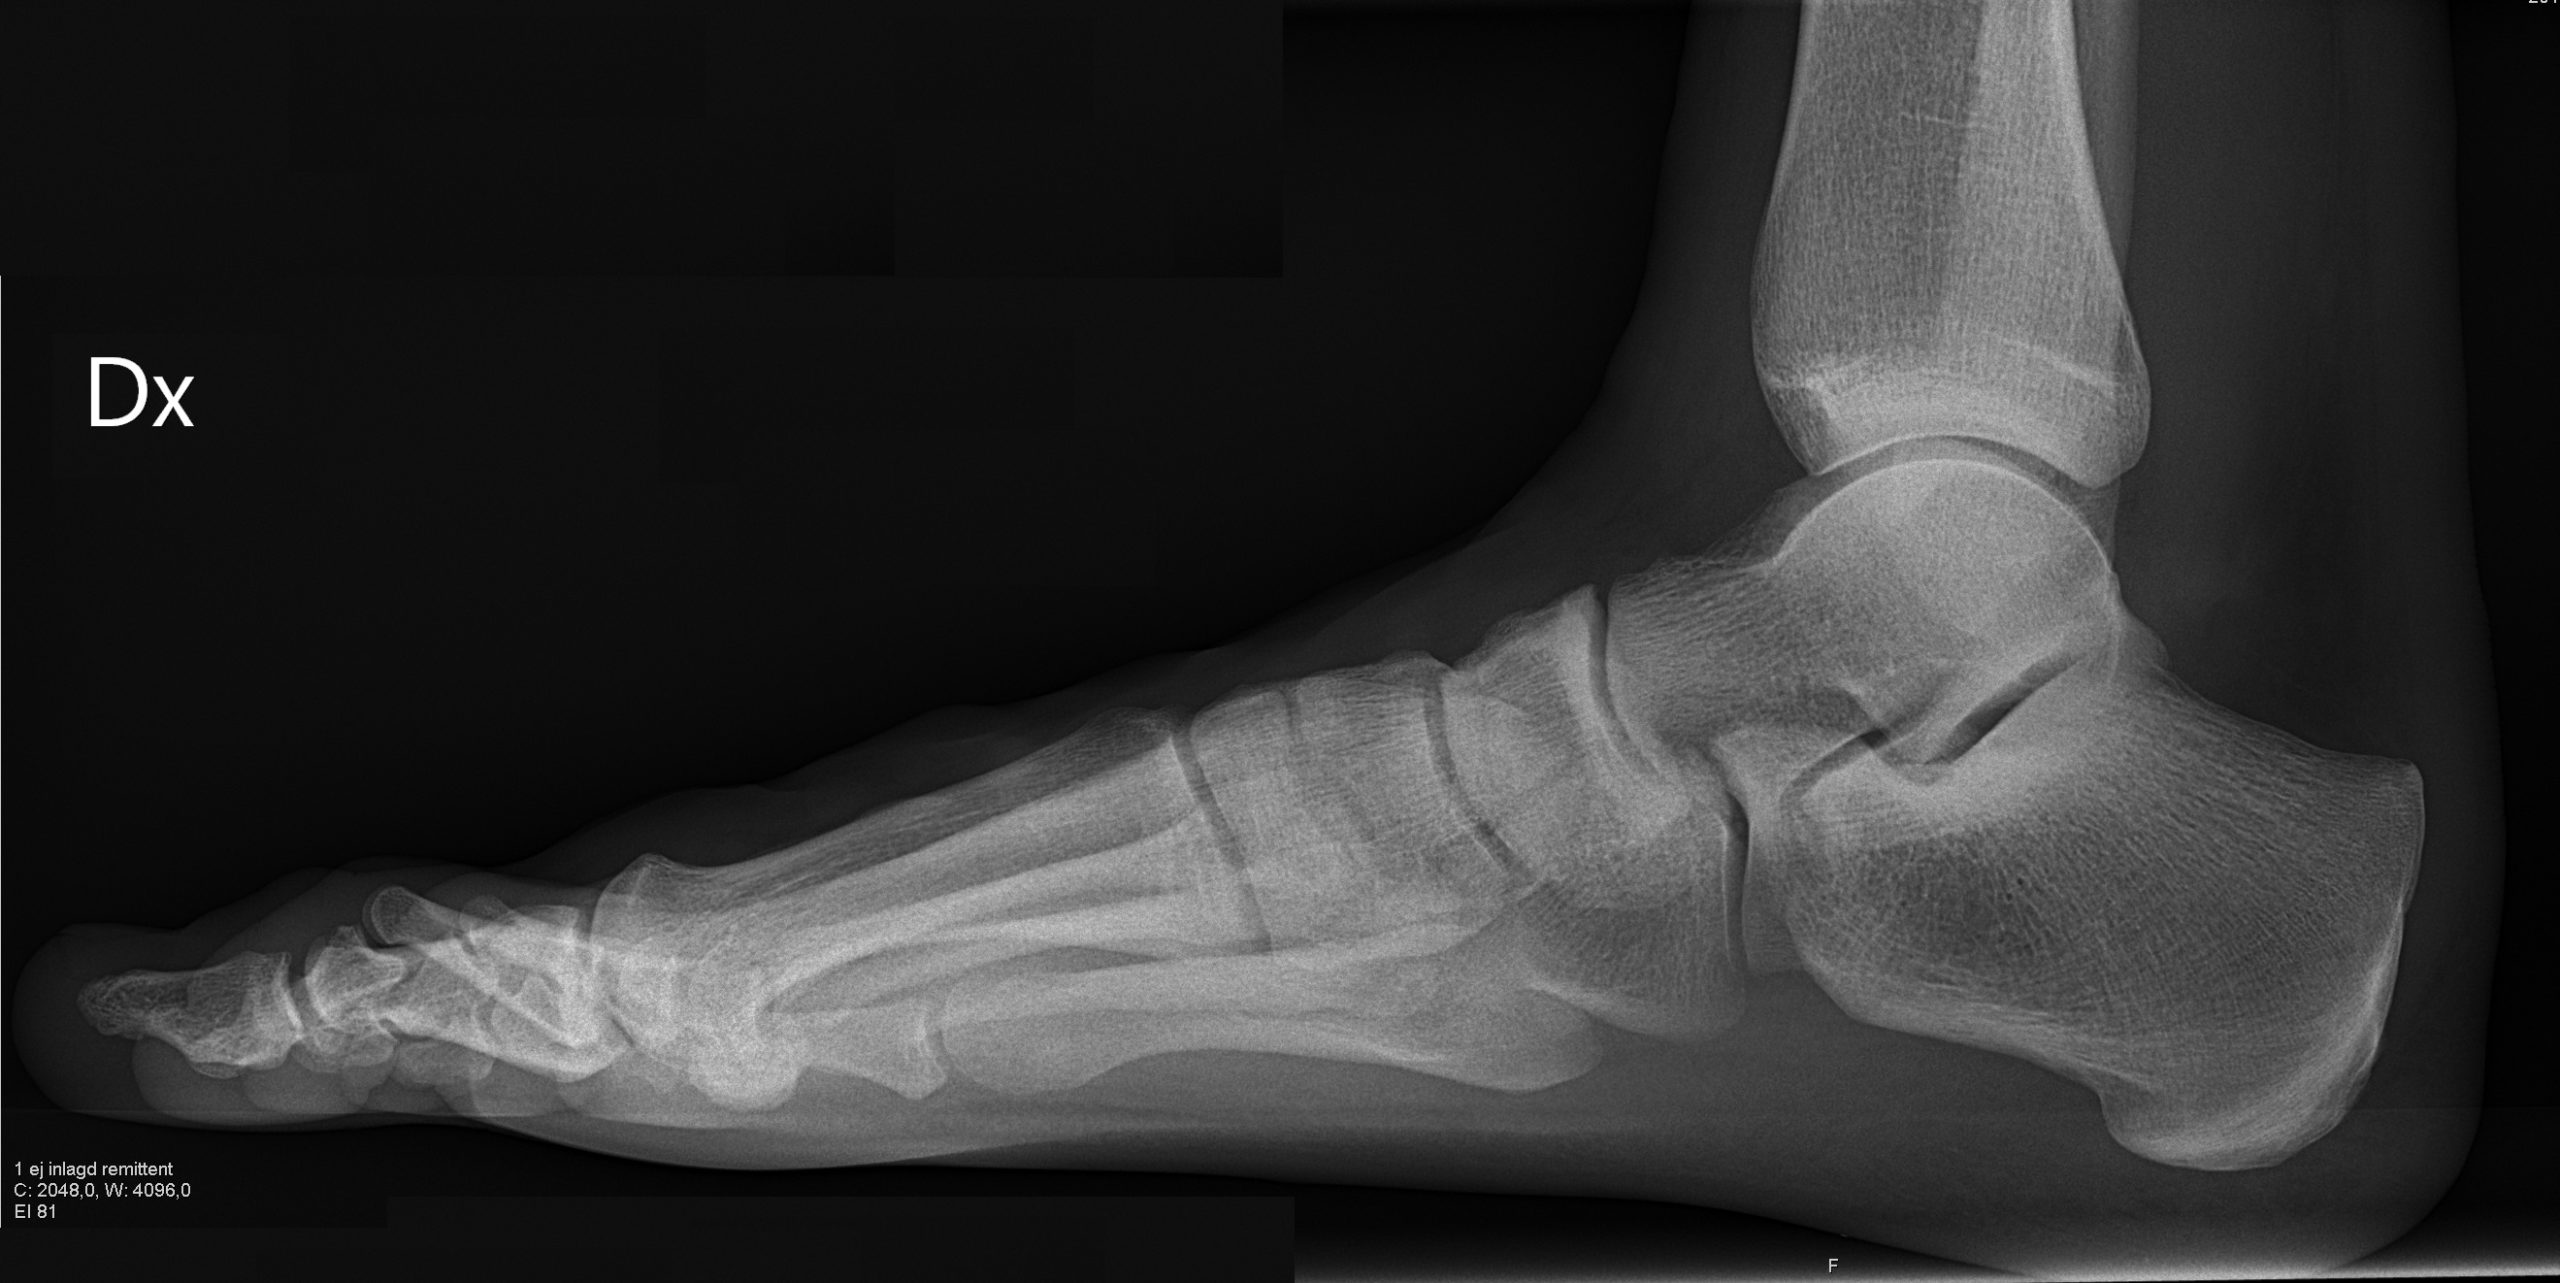 https://startalkmedia.com/wp-content/uploads/2022/09/X-ray_of_normal_right_foot_by_lateral_projection-scaled.jpeg